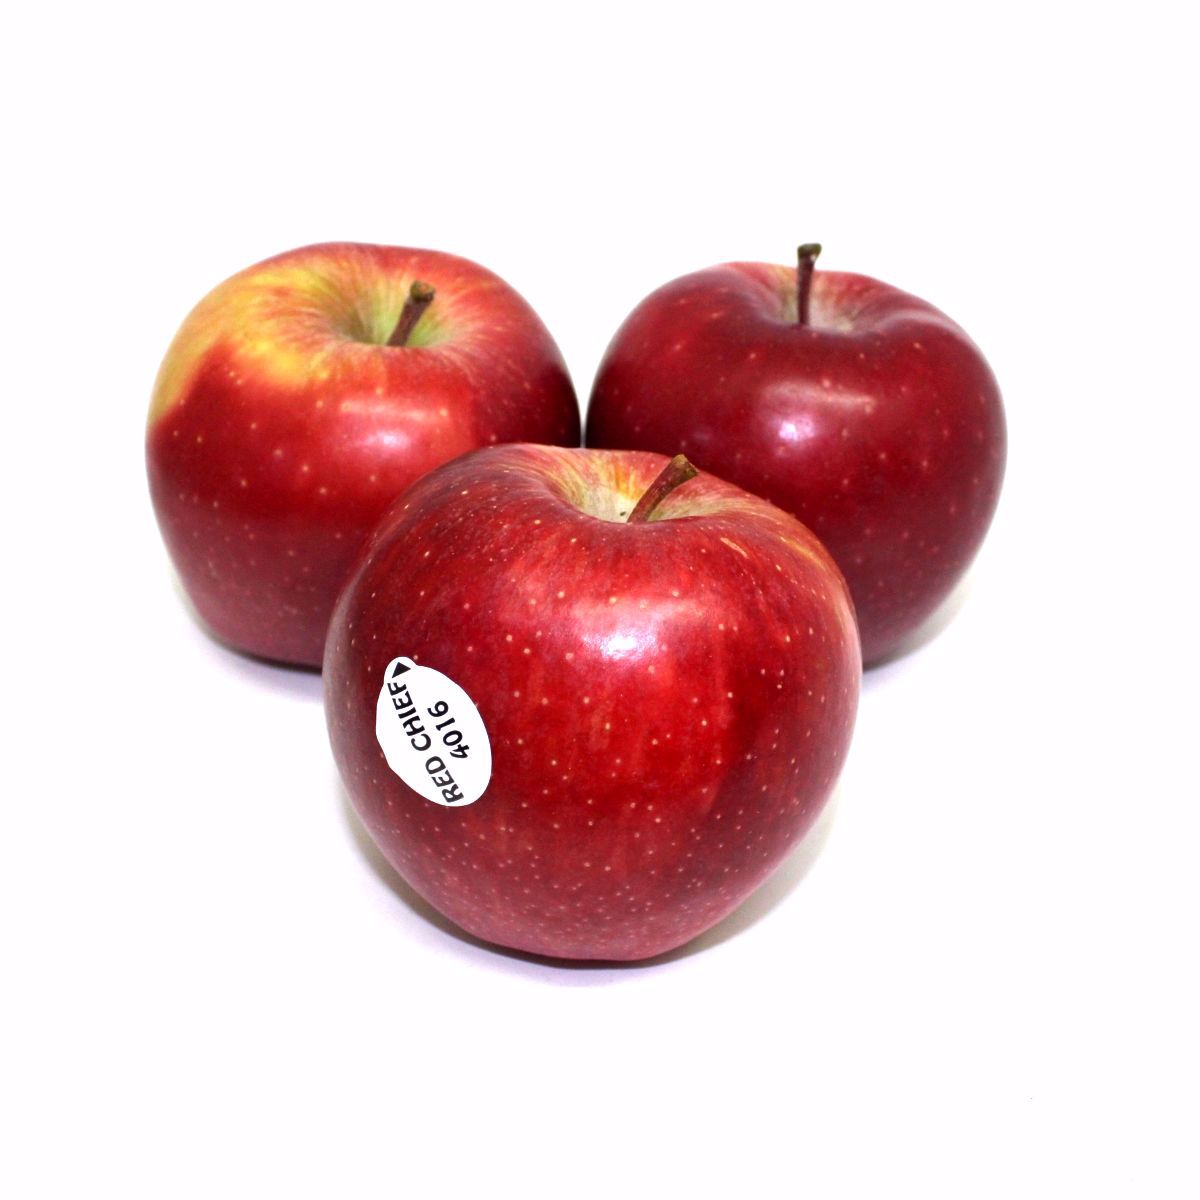 Red Delicious Apple 3 Pack. Yasar Halim